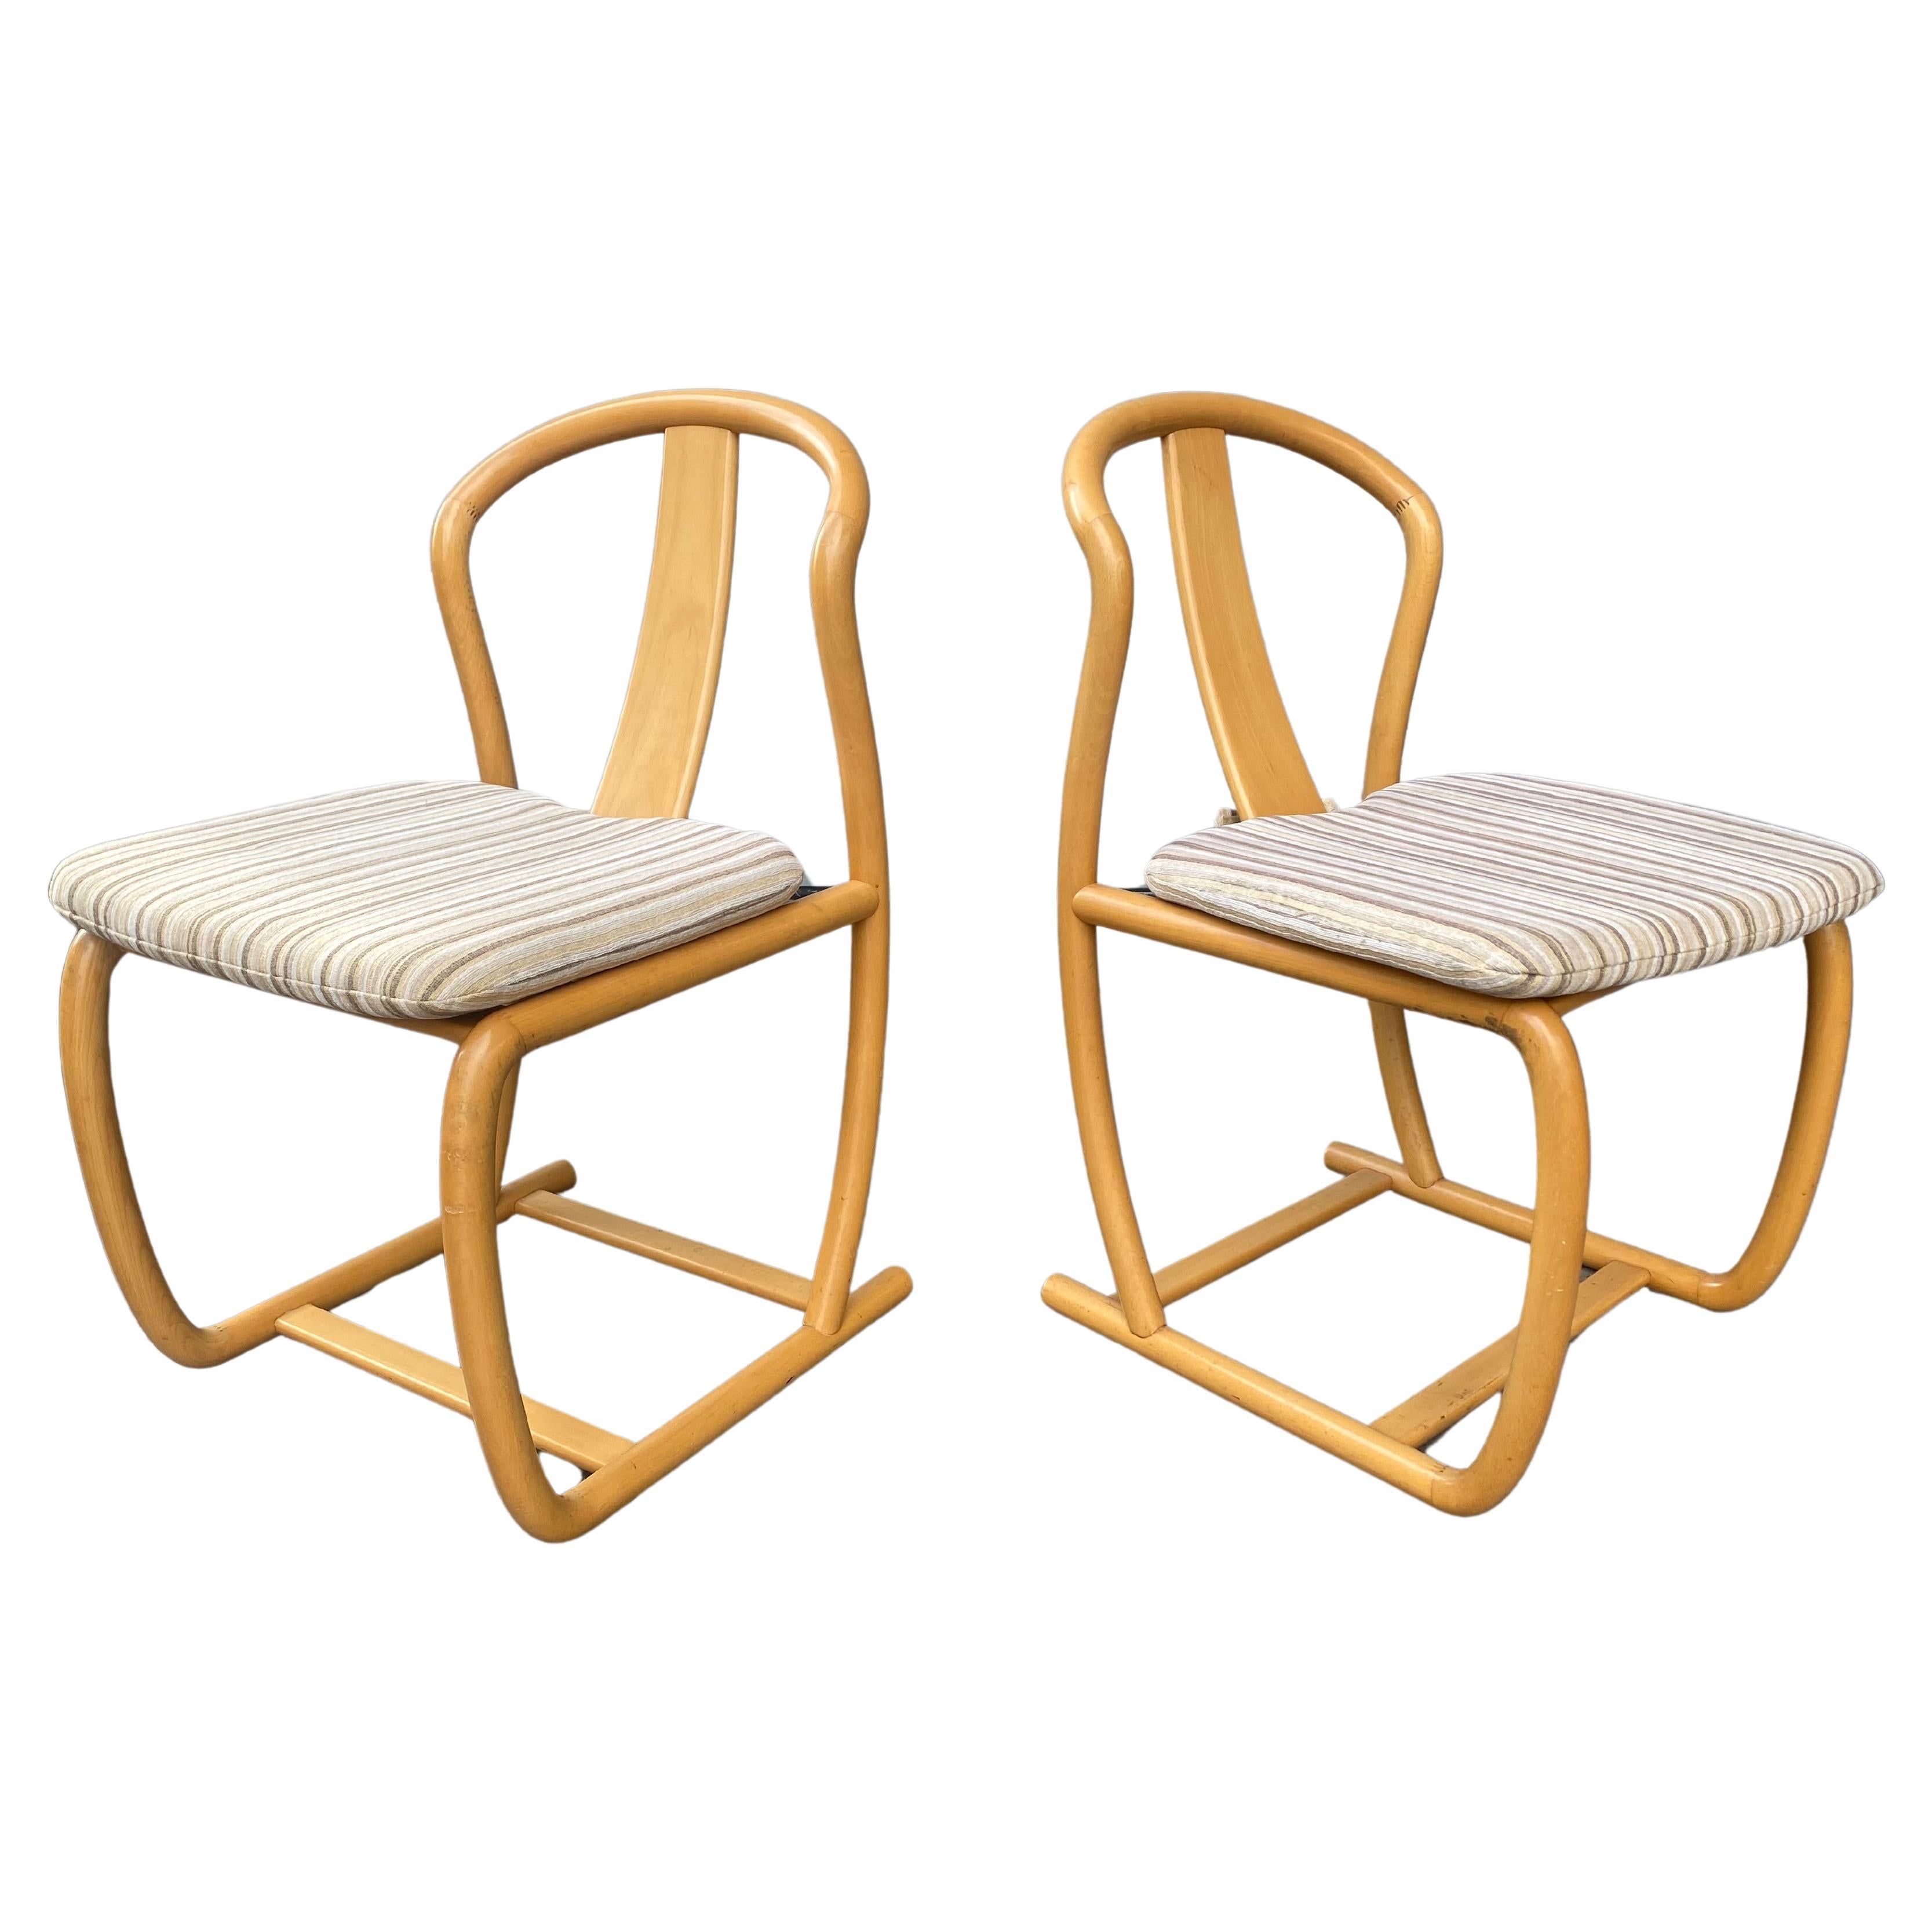 Set of Four Modern Dining Chairs in beech wood by Tecnosedia , Italy, 1980s